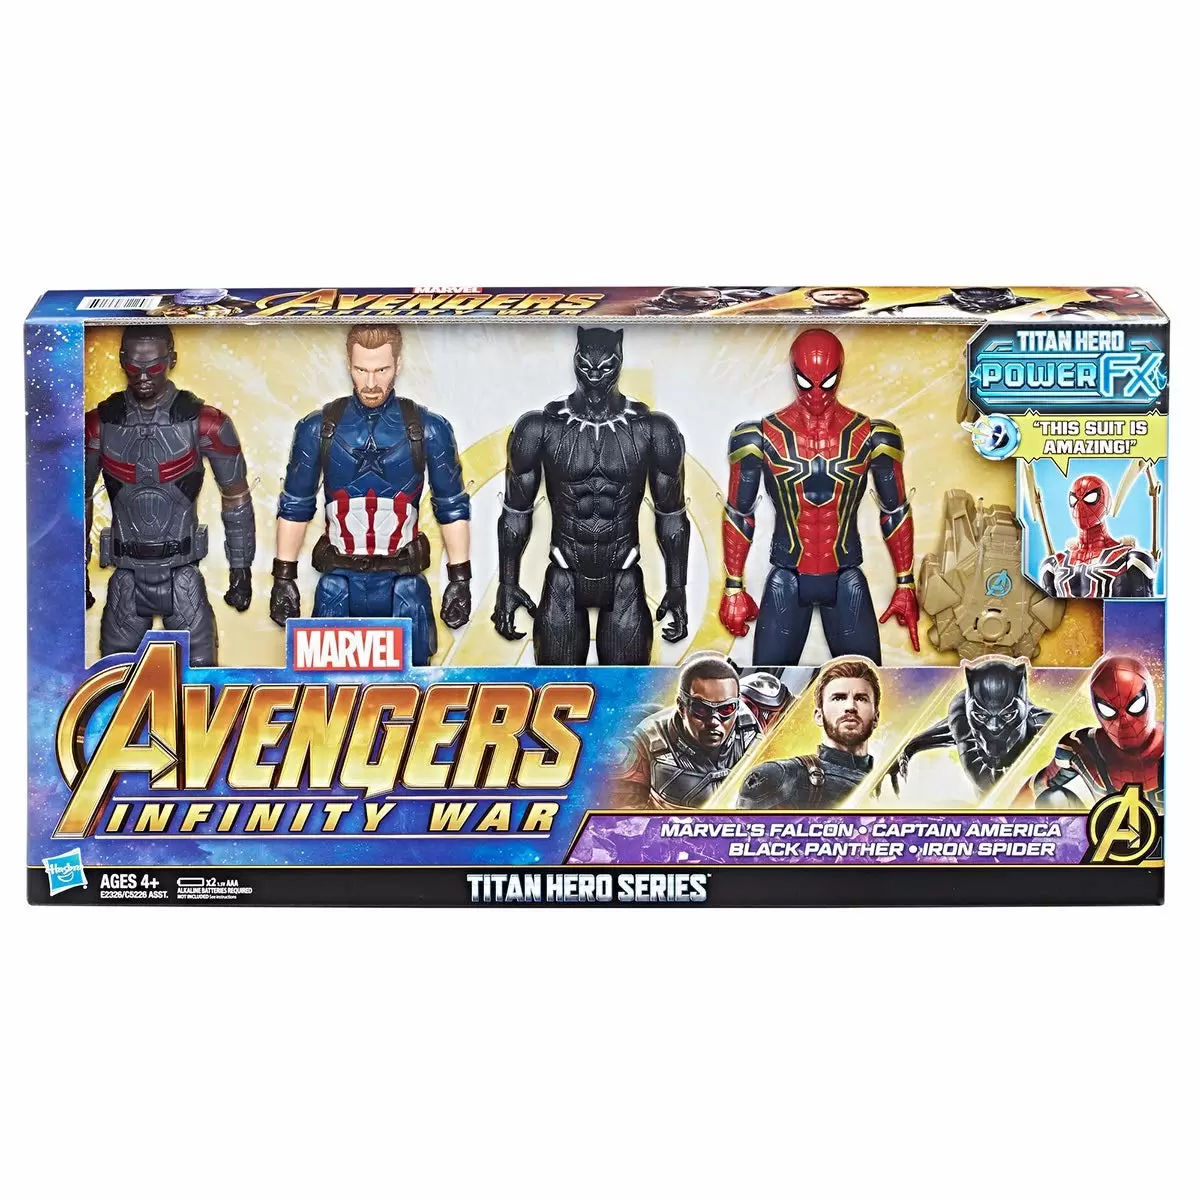 With Iron Spider NEW Marvel Avengers Infinity War Titan Hero Series 4 Pack 